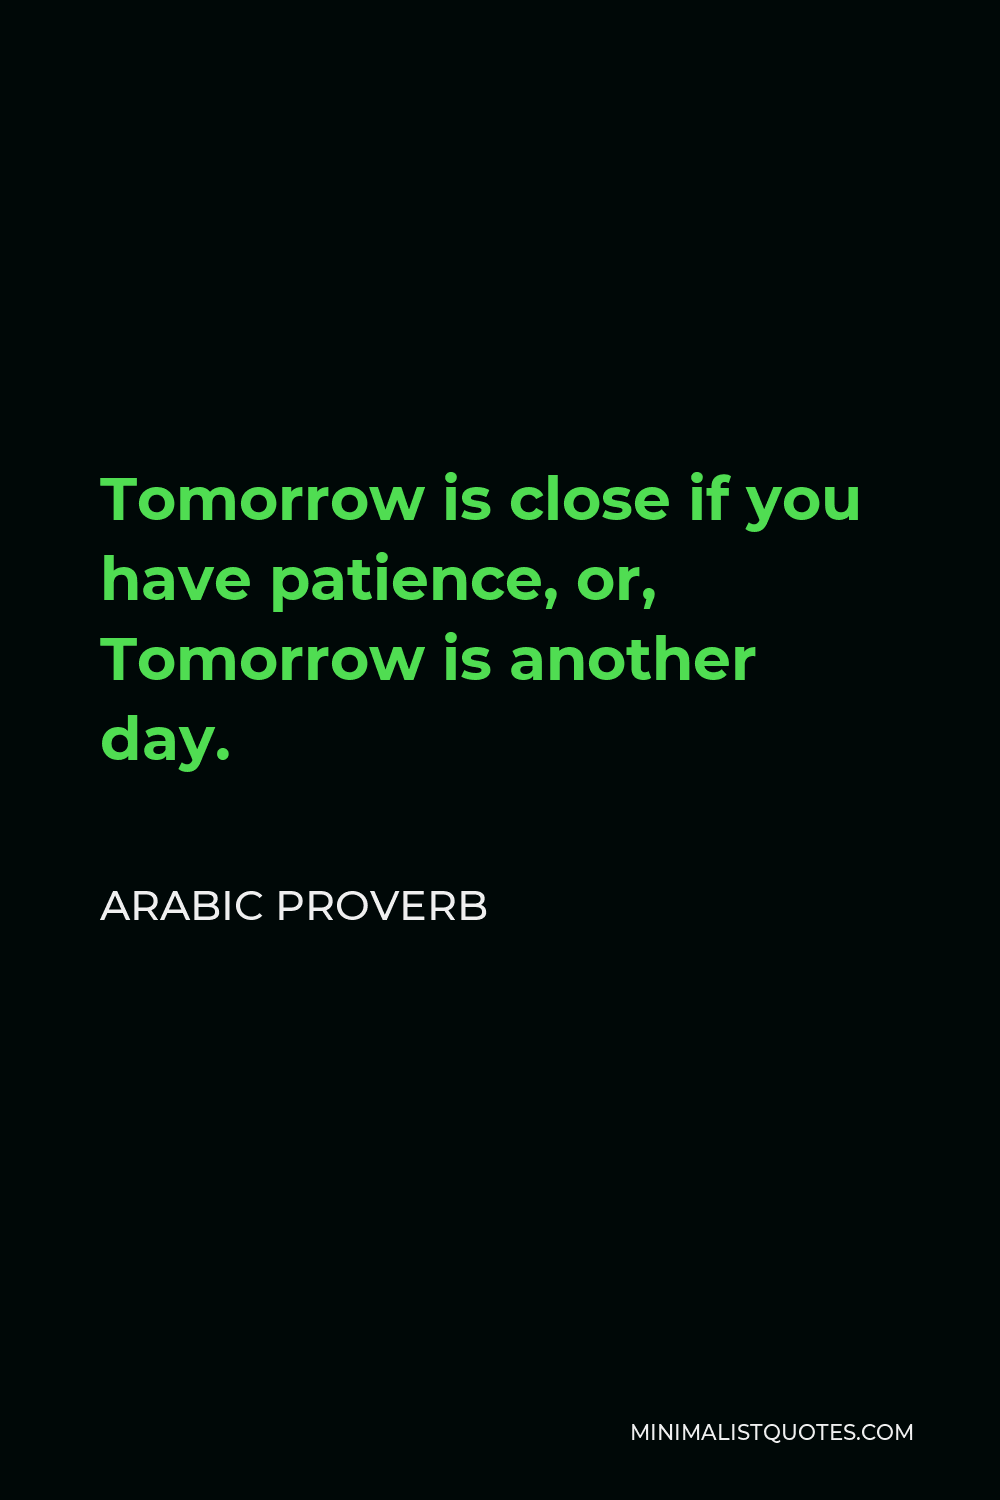 Arabic Proverb Quote - Tomorrow is close if you have patience, or, Tomorrow is another day.